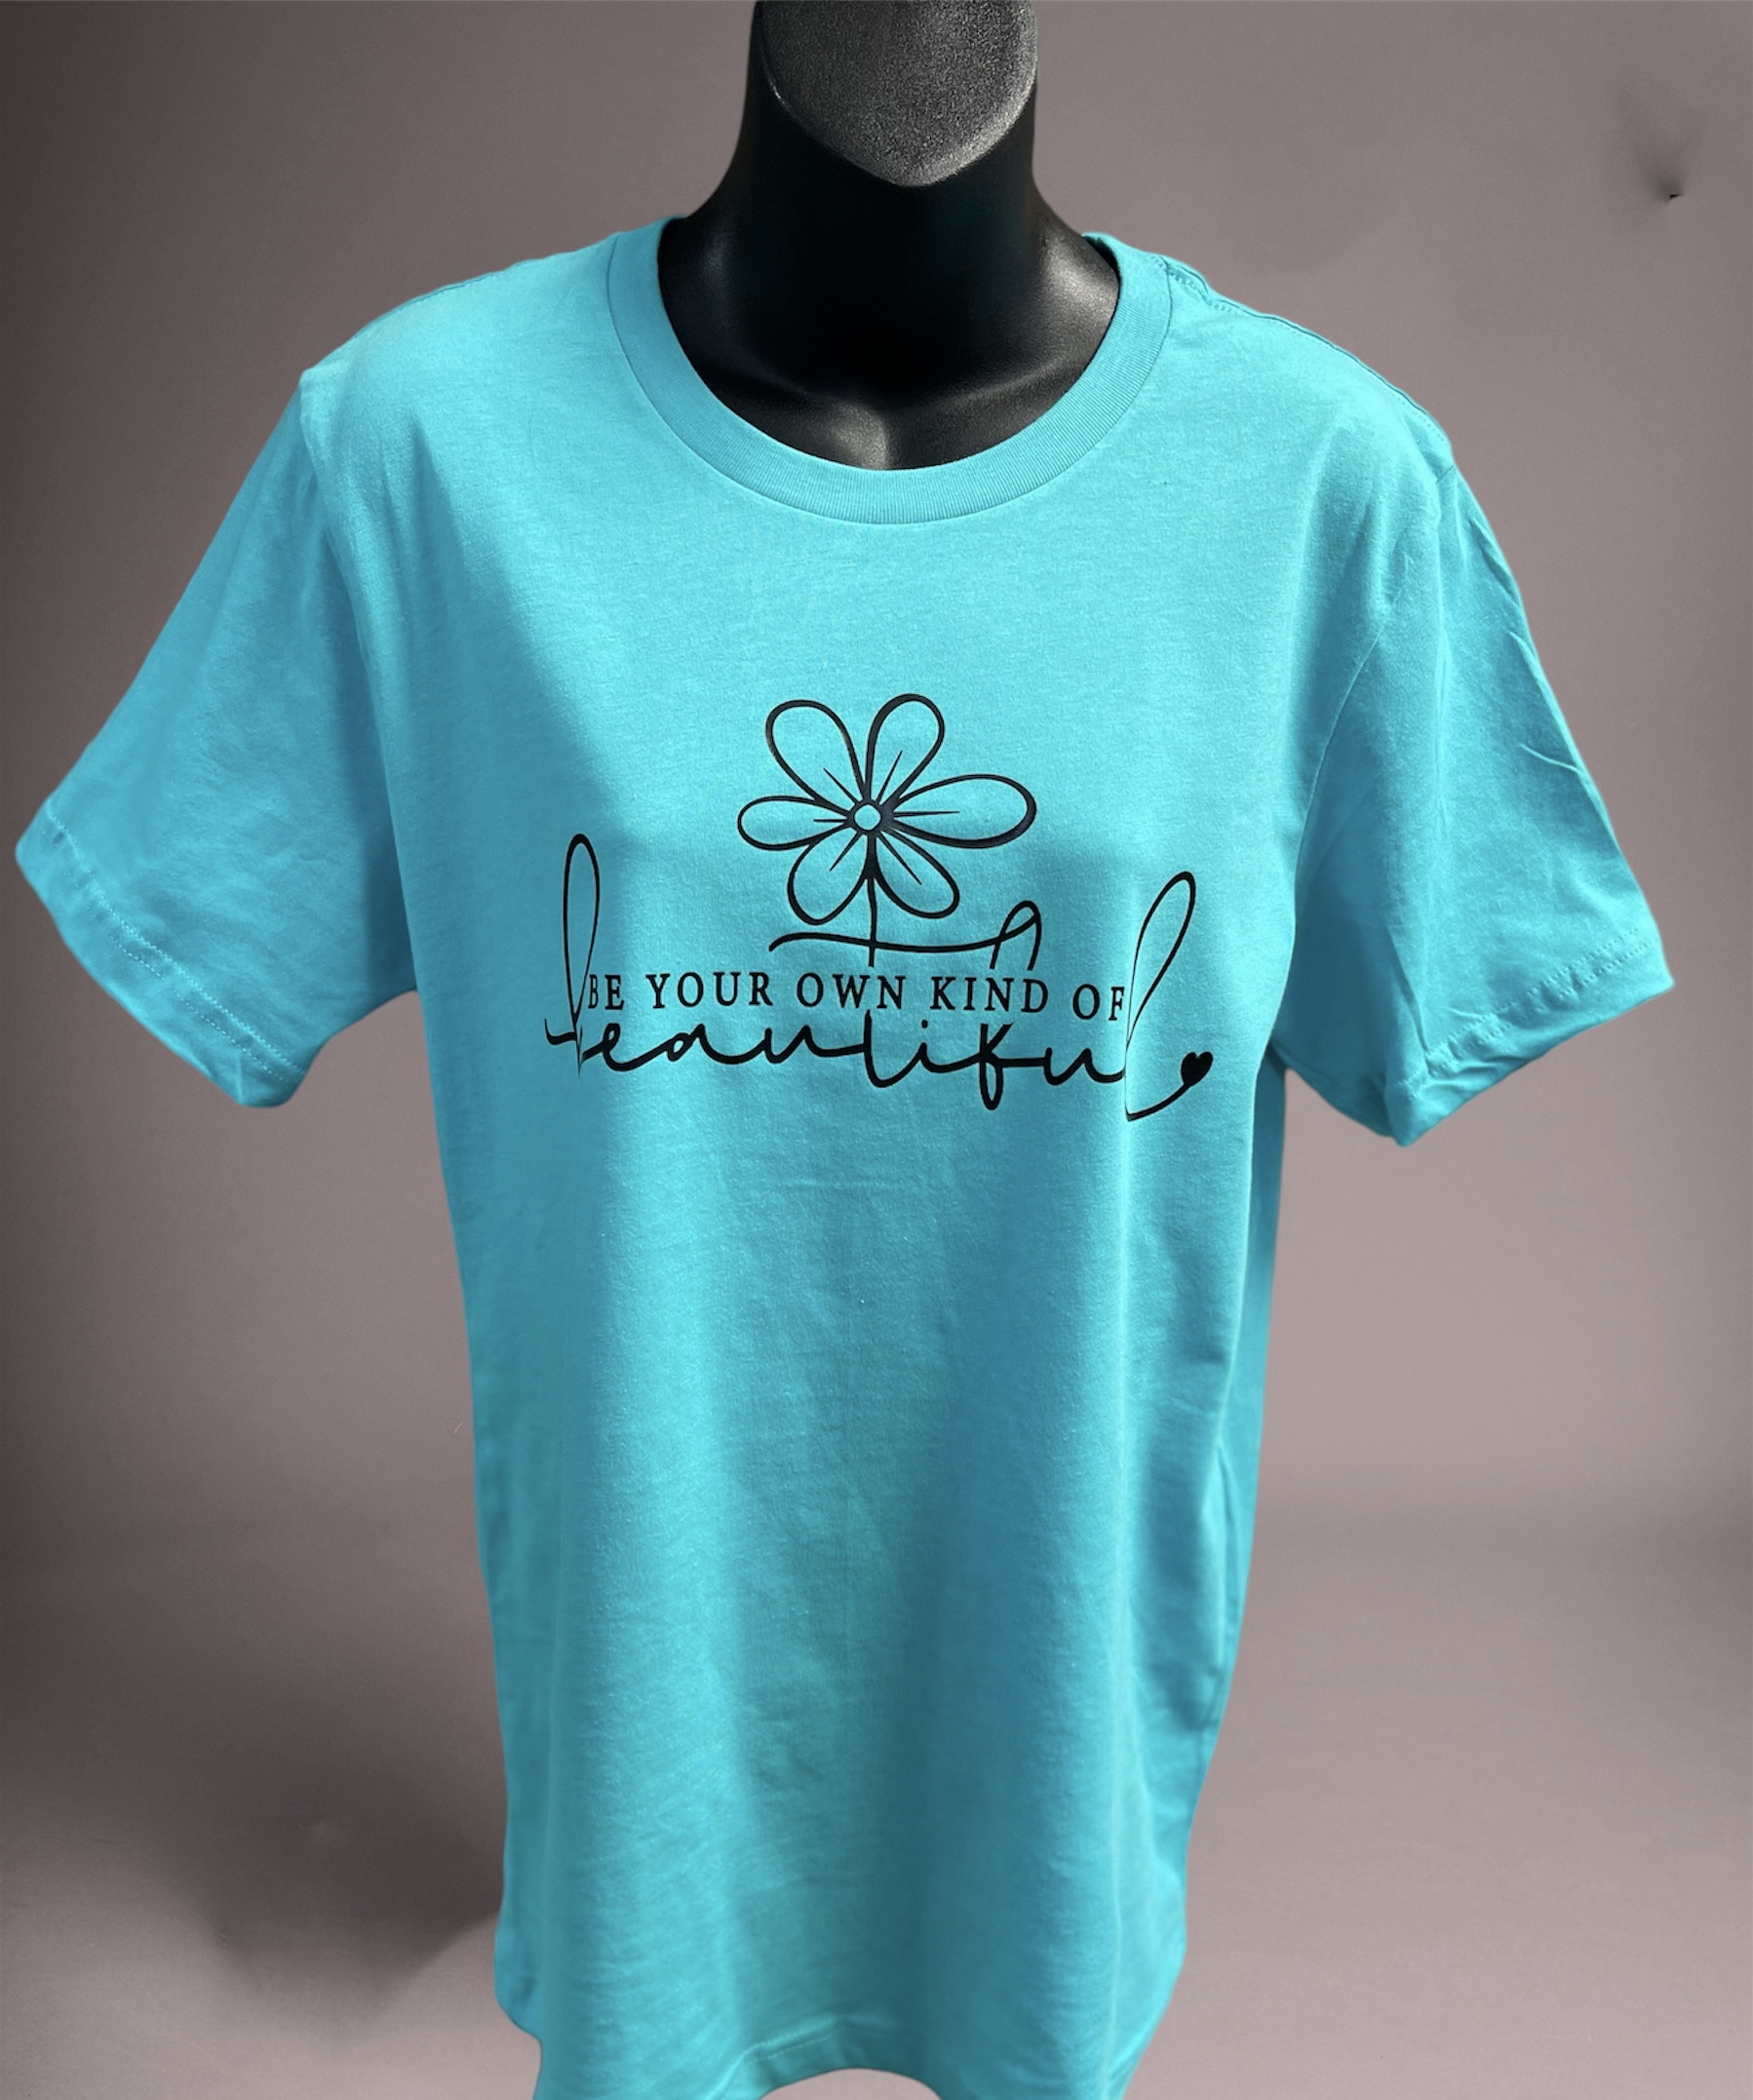 Be Your Own Kind of Beautiful Teal Shirt